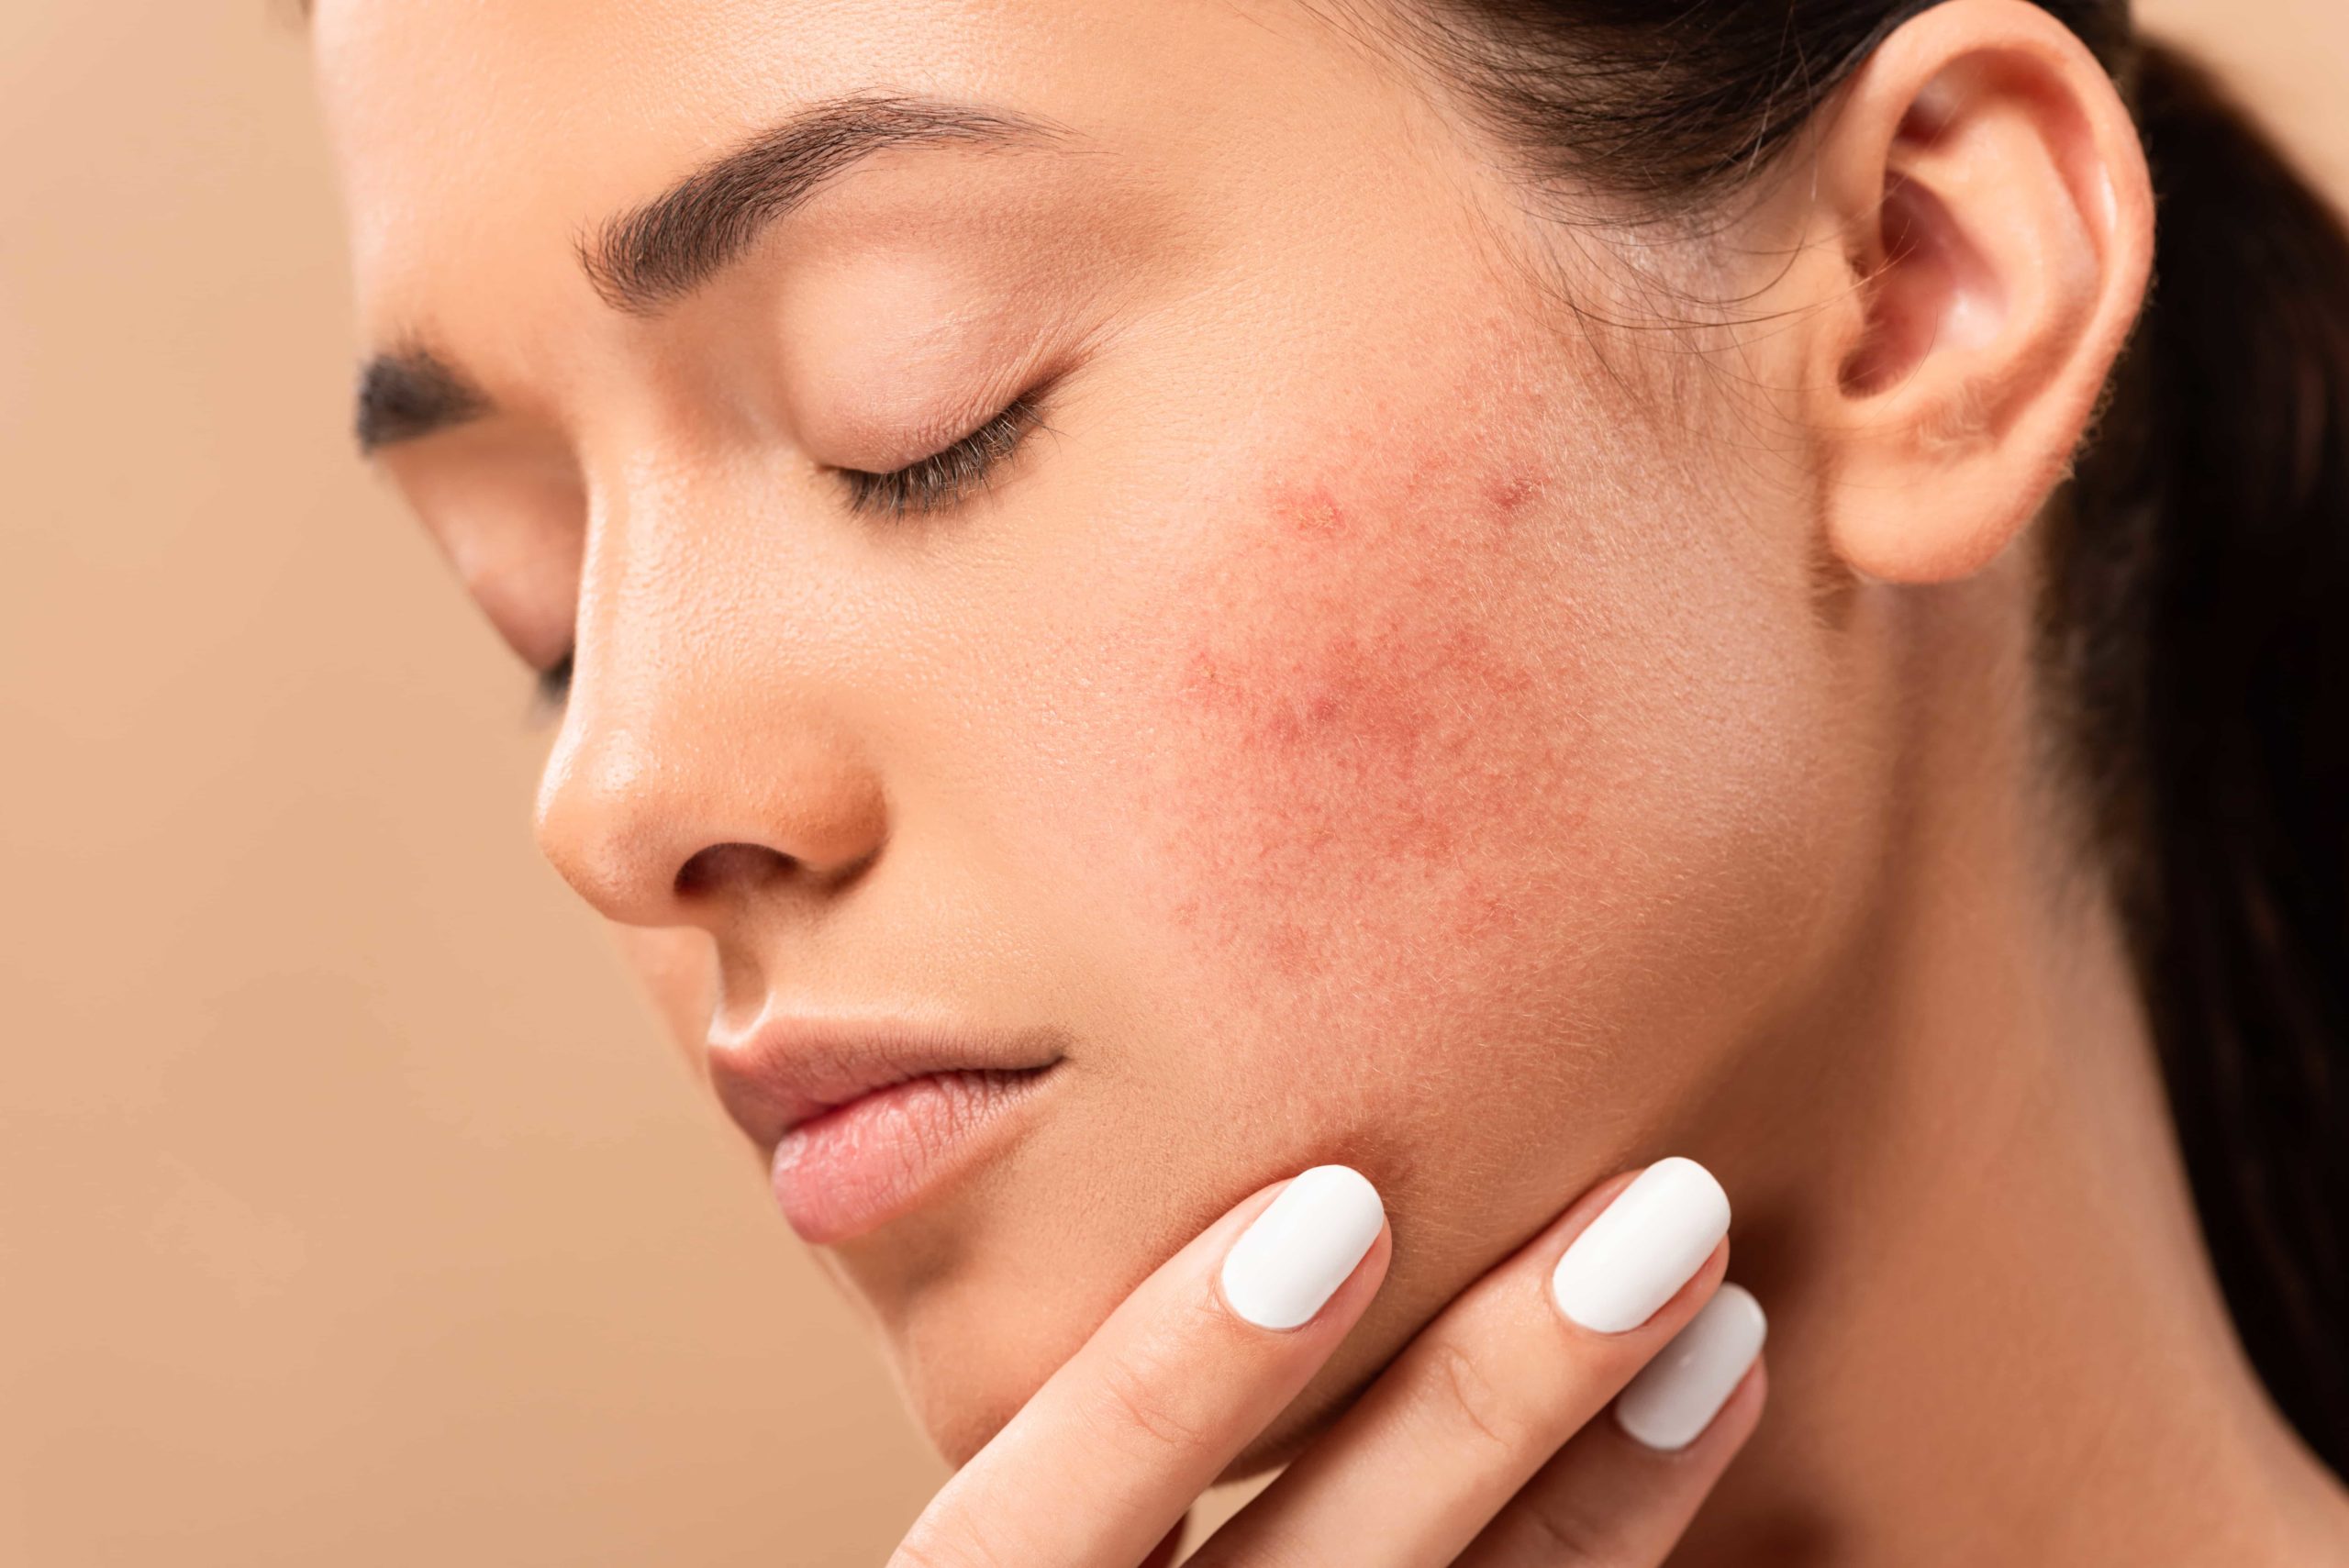 What Are Some Acne Treatments To Avoid